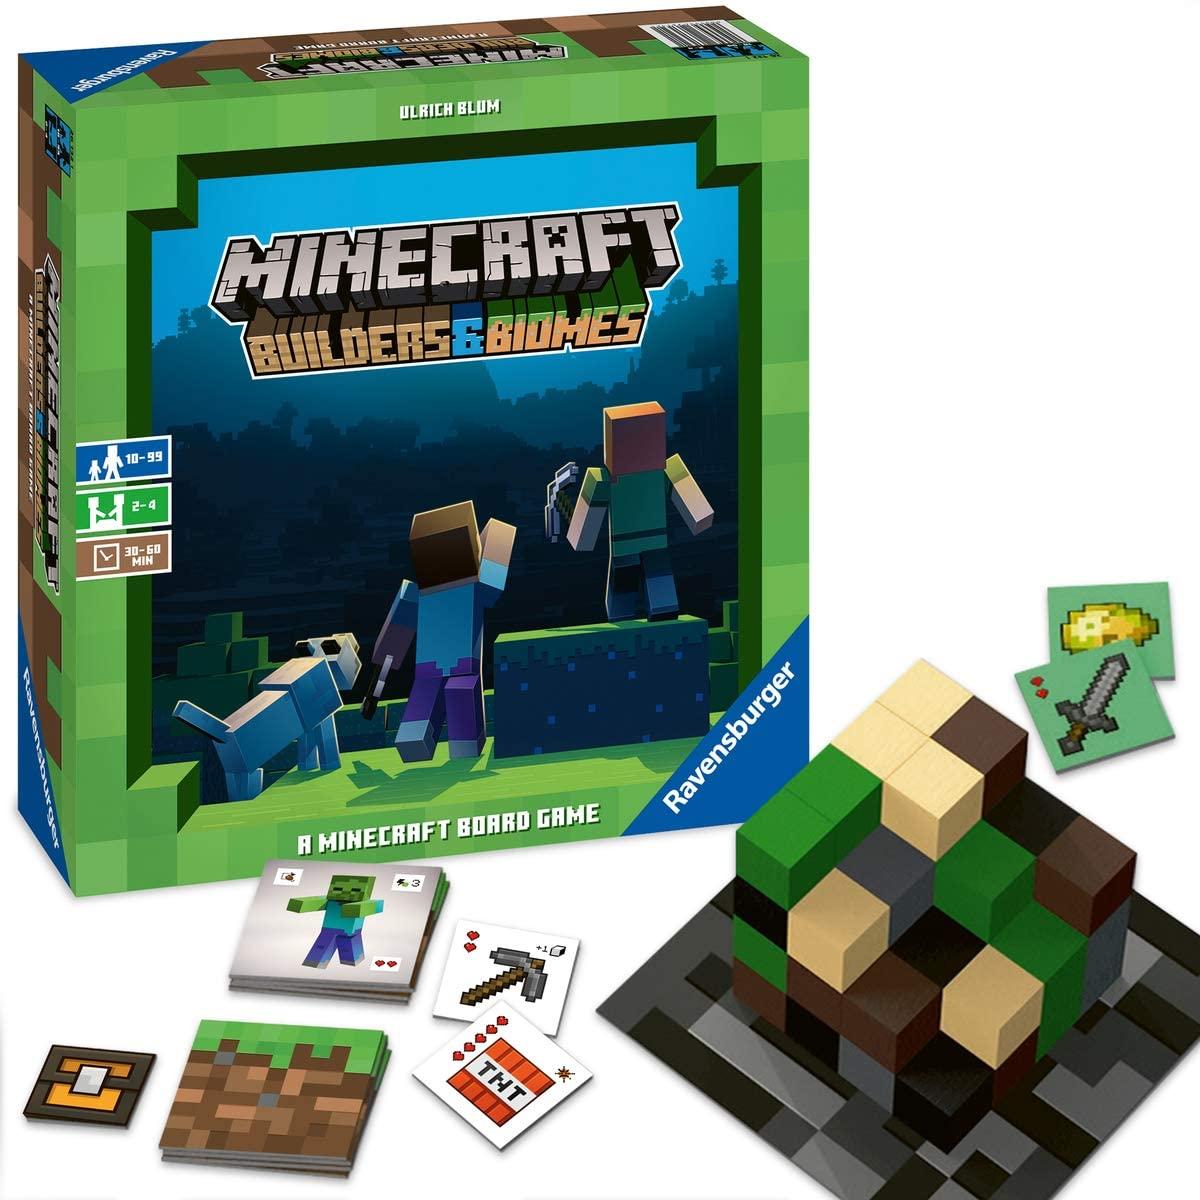 Ravensburger Minecraft Builders and Biomes Strategy Board Game for $24.97